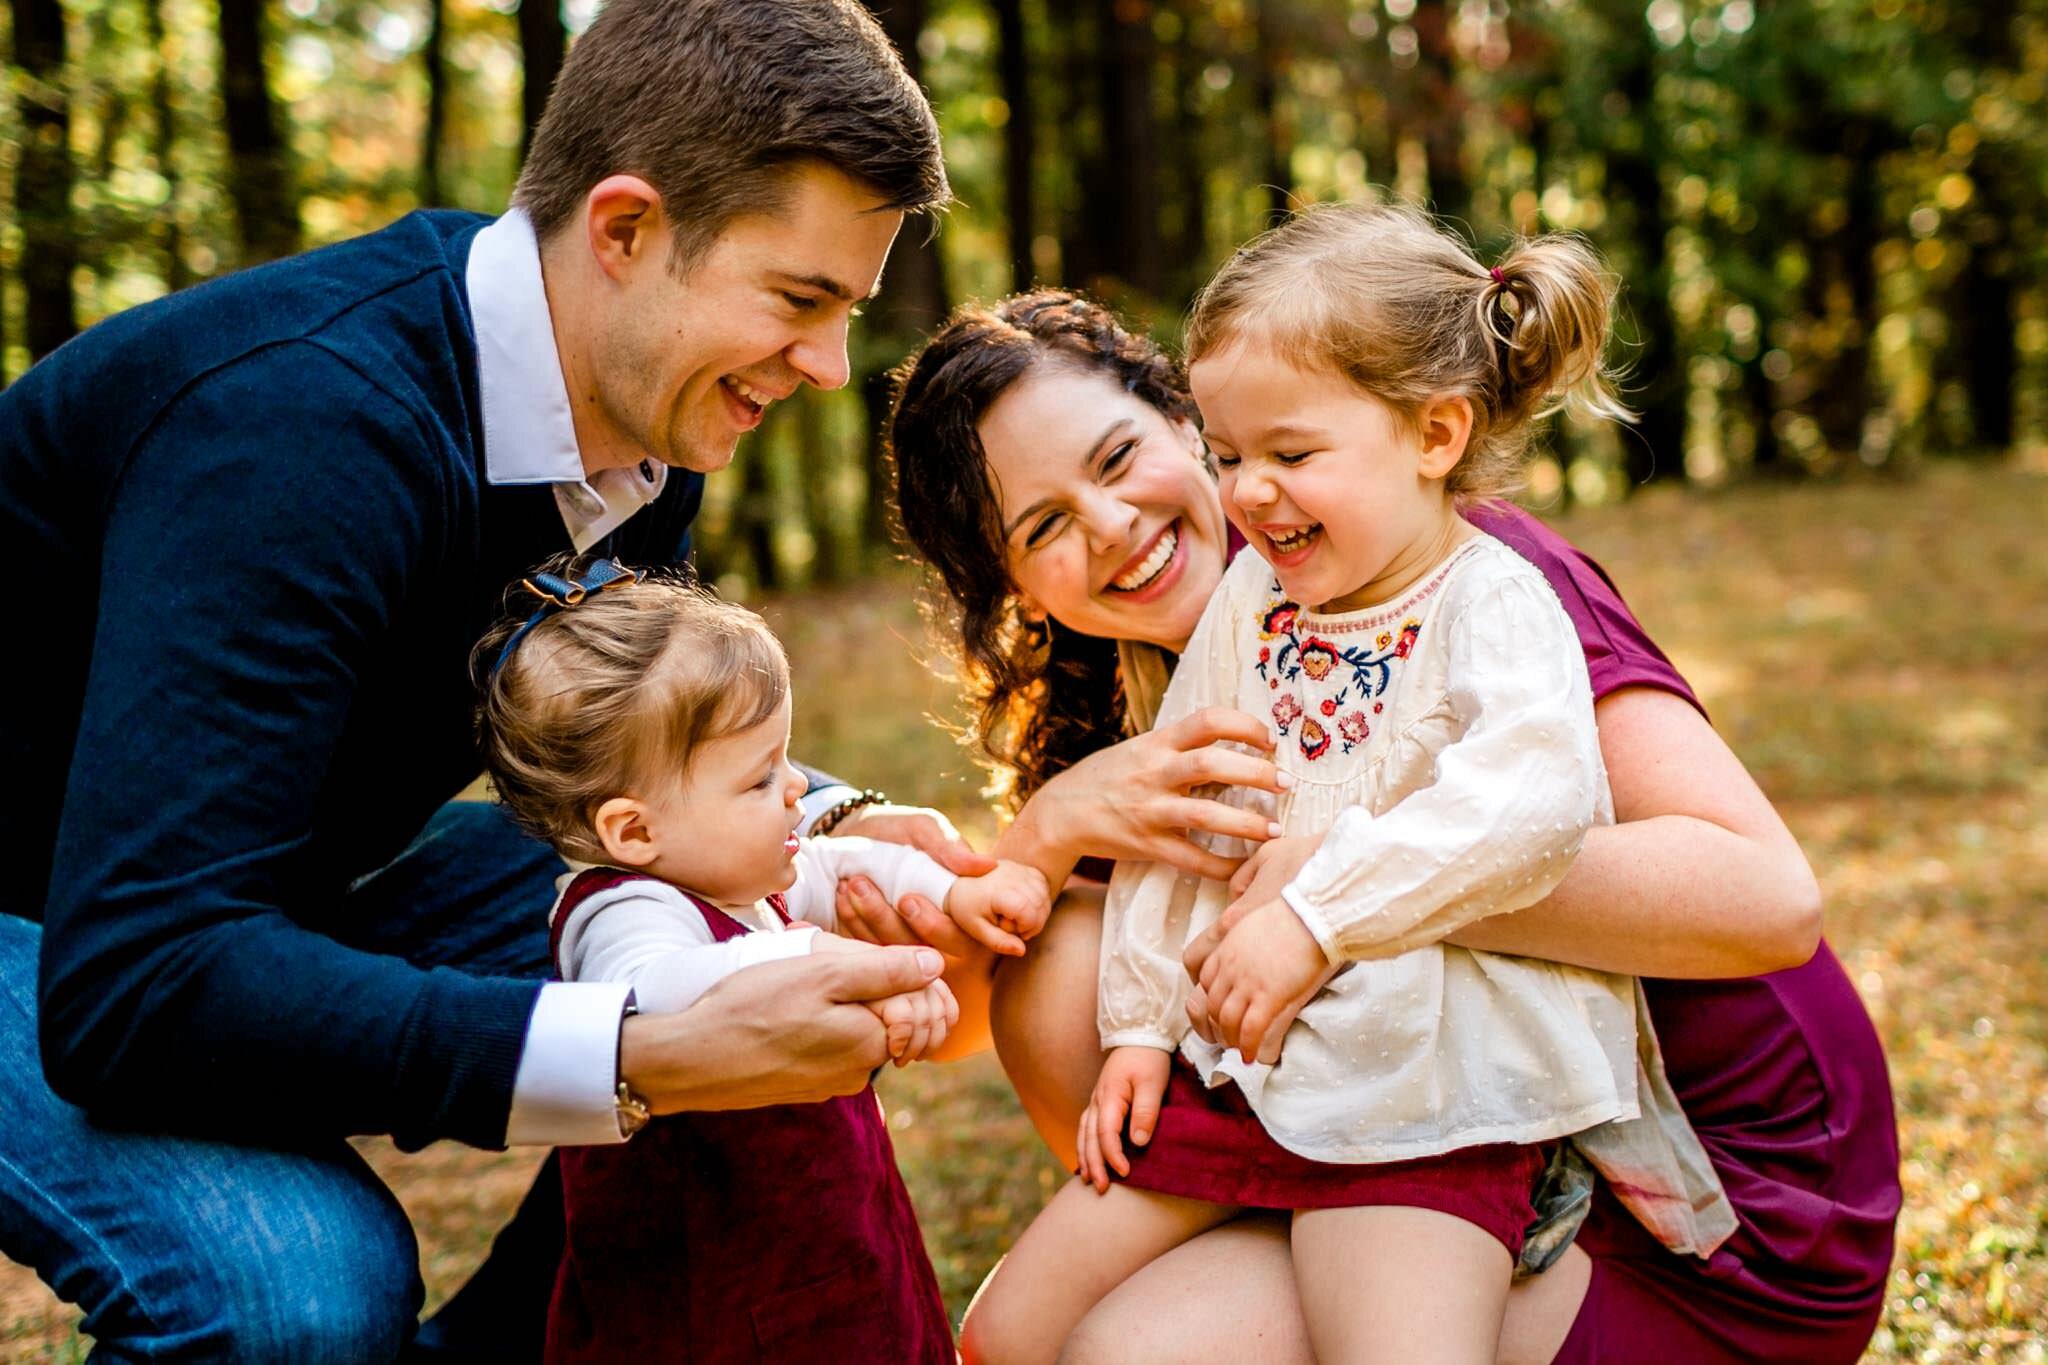 Raleigh Family Photographer | By G. Lin Photography | Umstead Park | Family laughing together outside